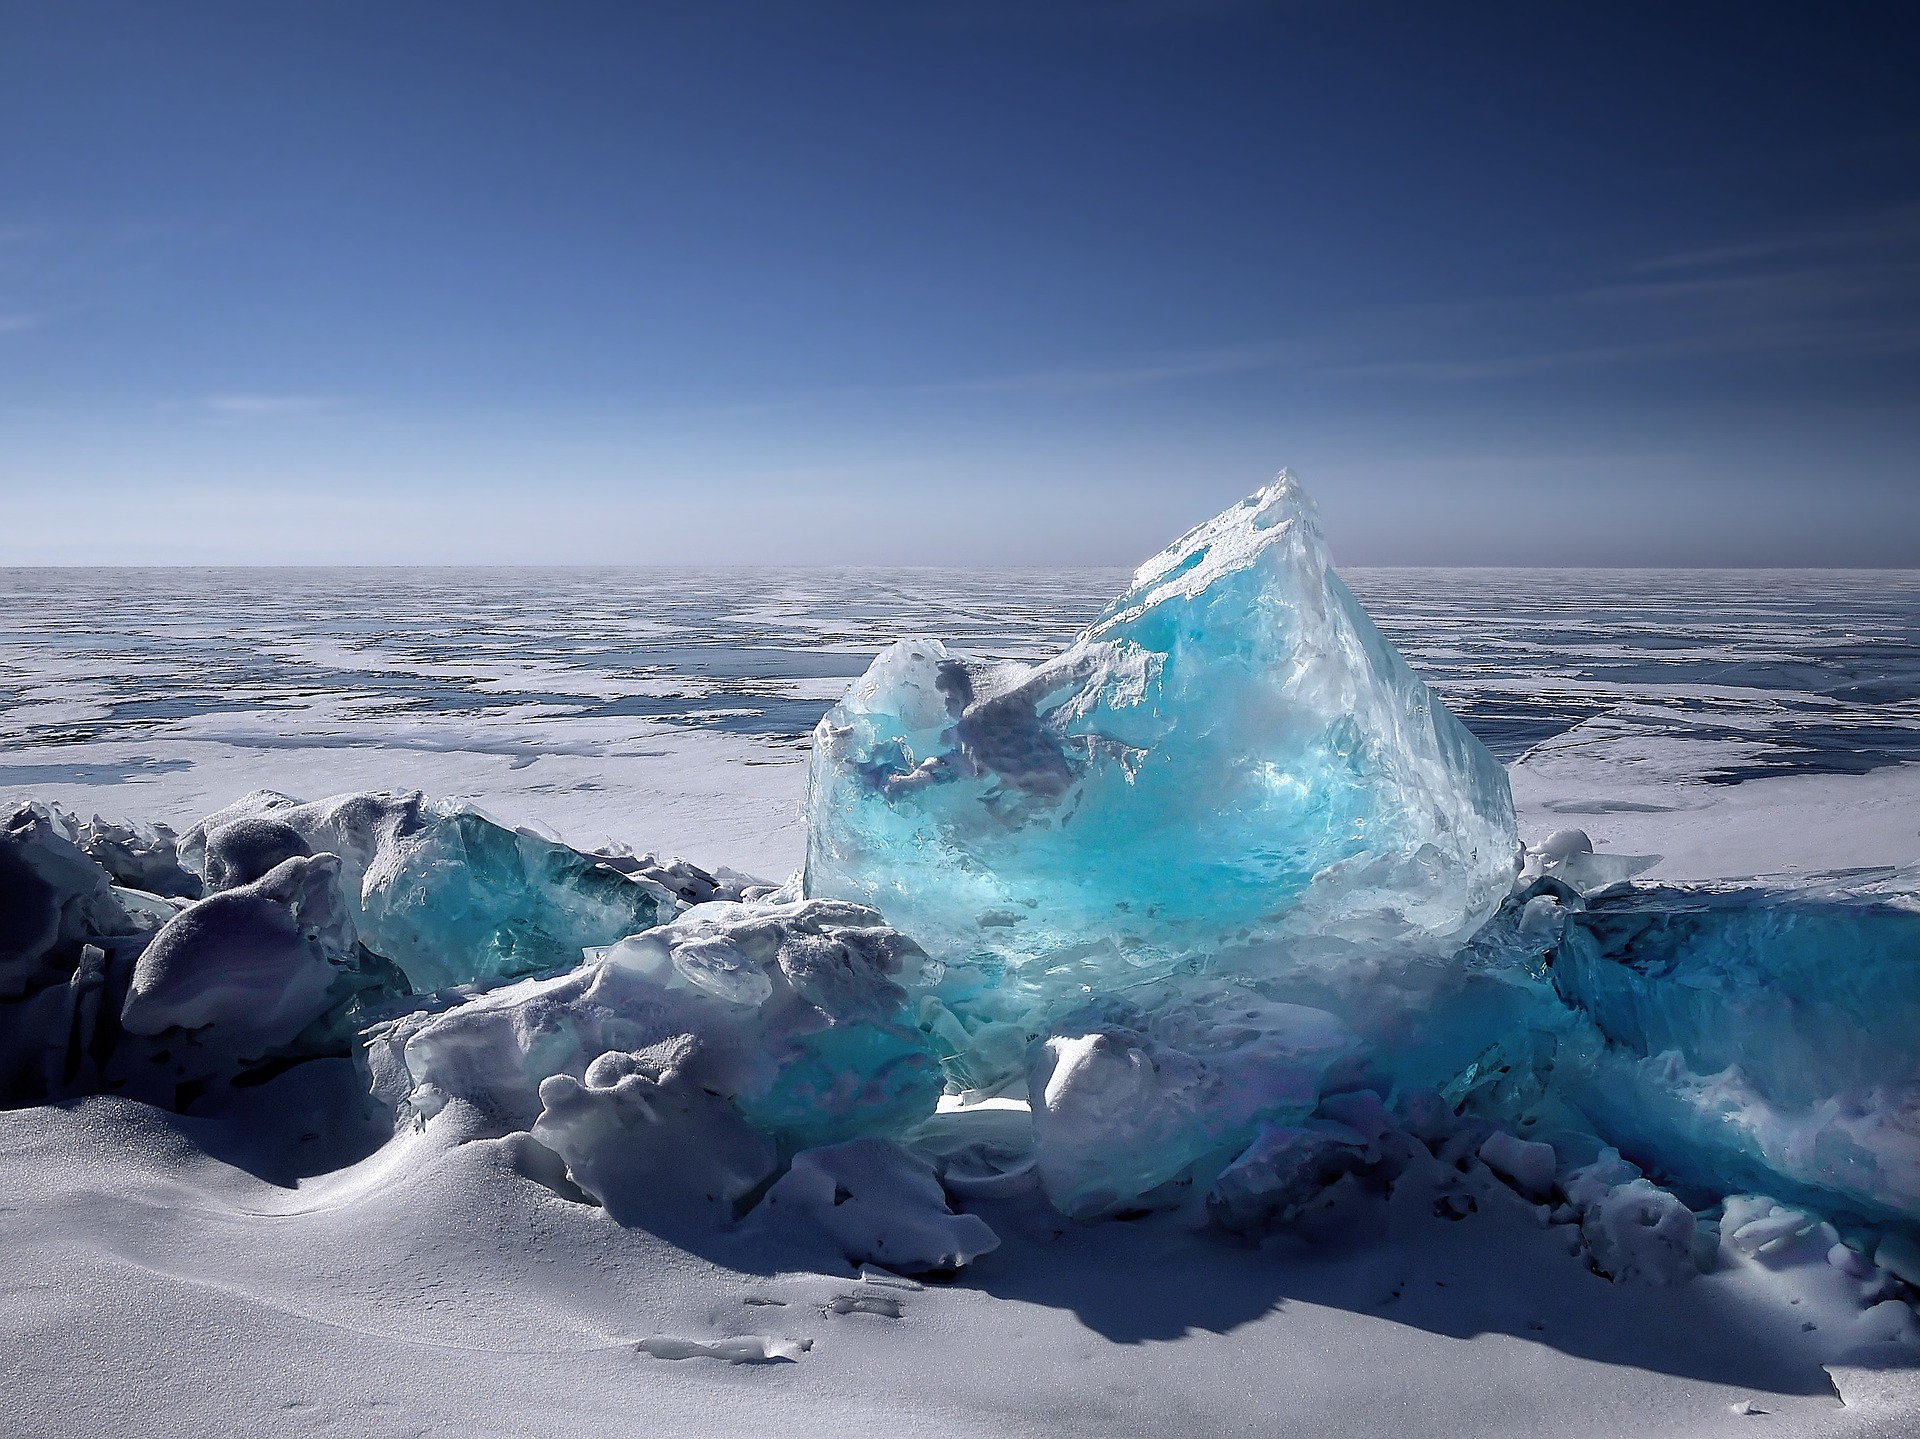 About That Perfectly Rectangular Iceberg…